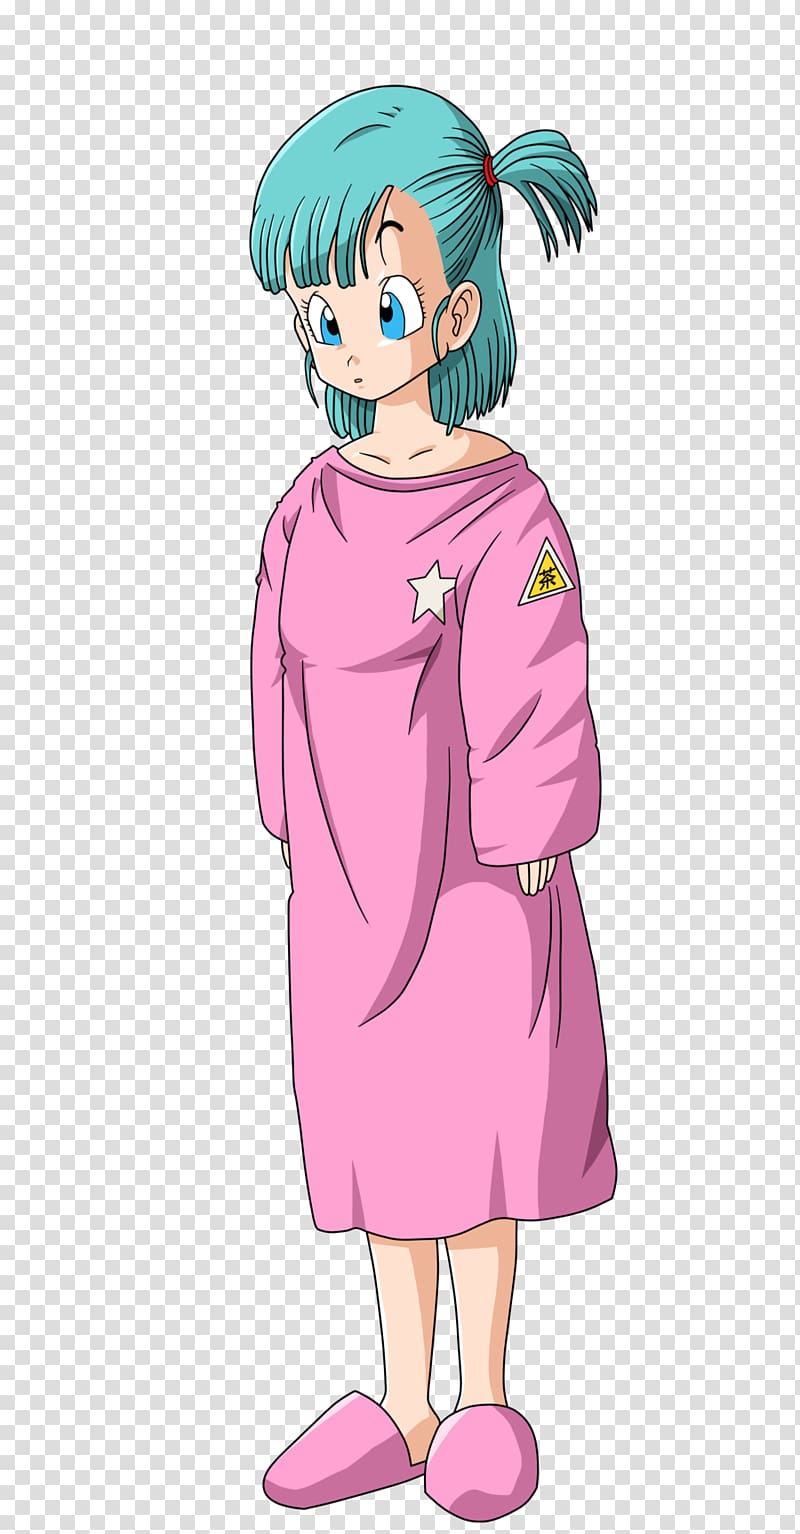 Bulma Goku Bulla Android 18 Trunks, baby clothes transparent background PNG clipart